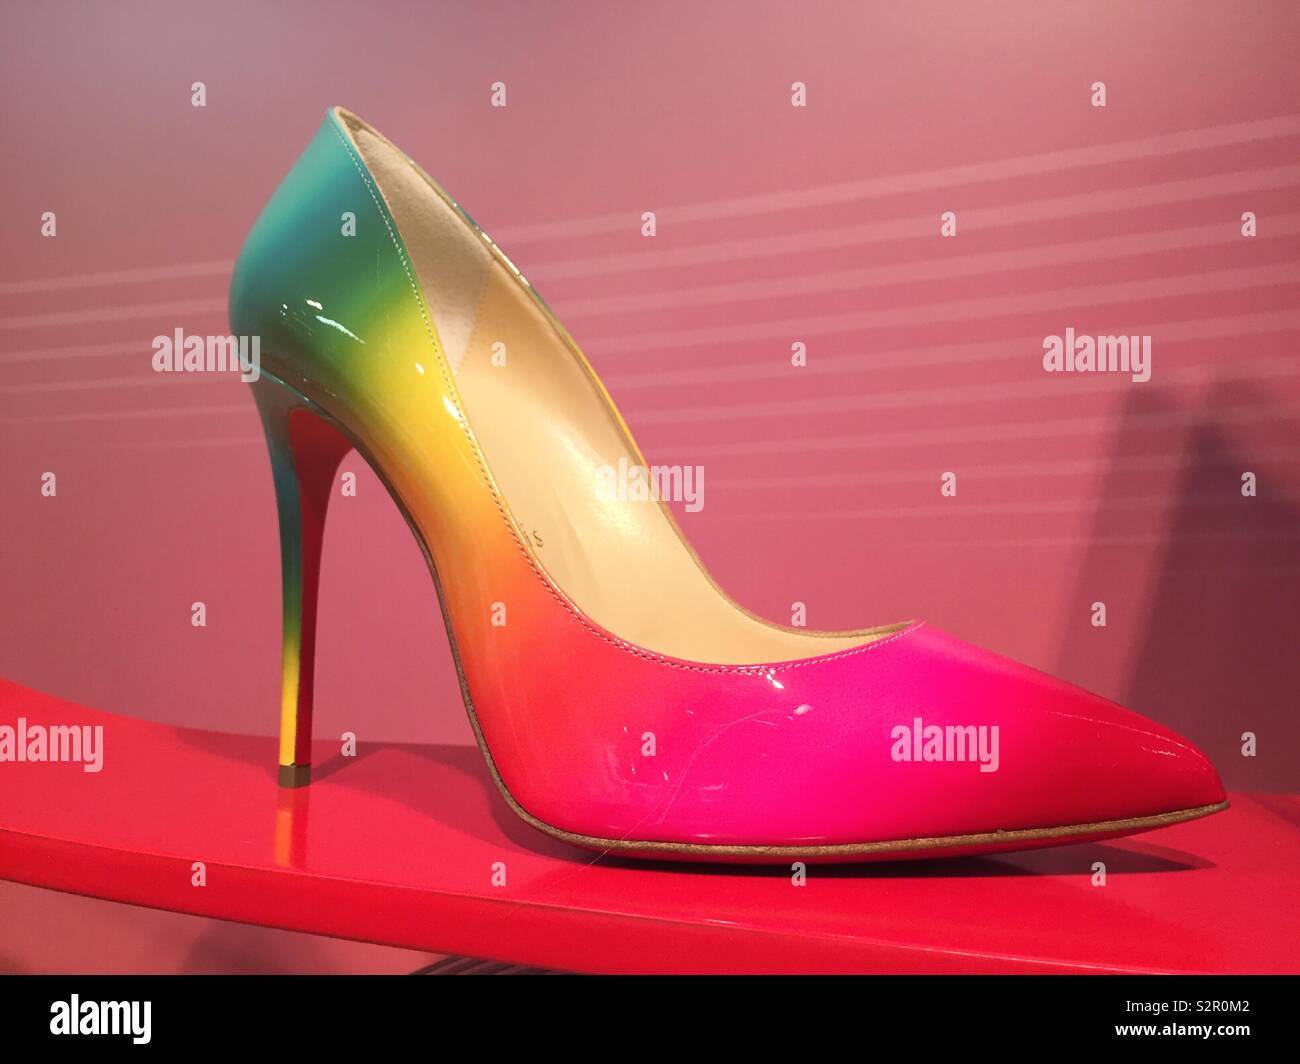 Christian Louboutin vibrantly colored high-heeled shoe on sale in a  department store, NYC, USA Stock Photo - Alamy